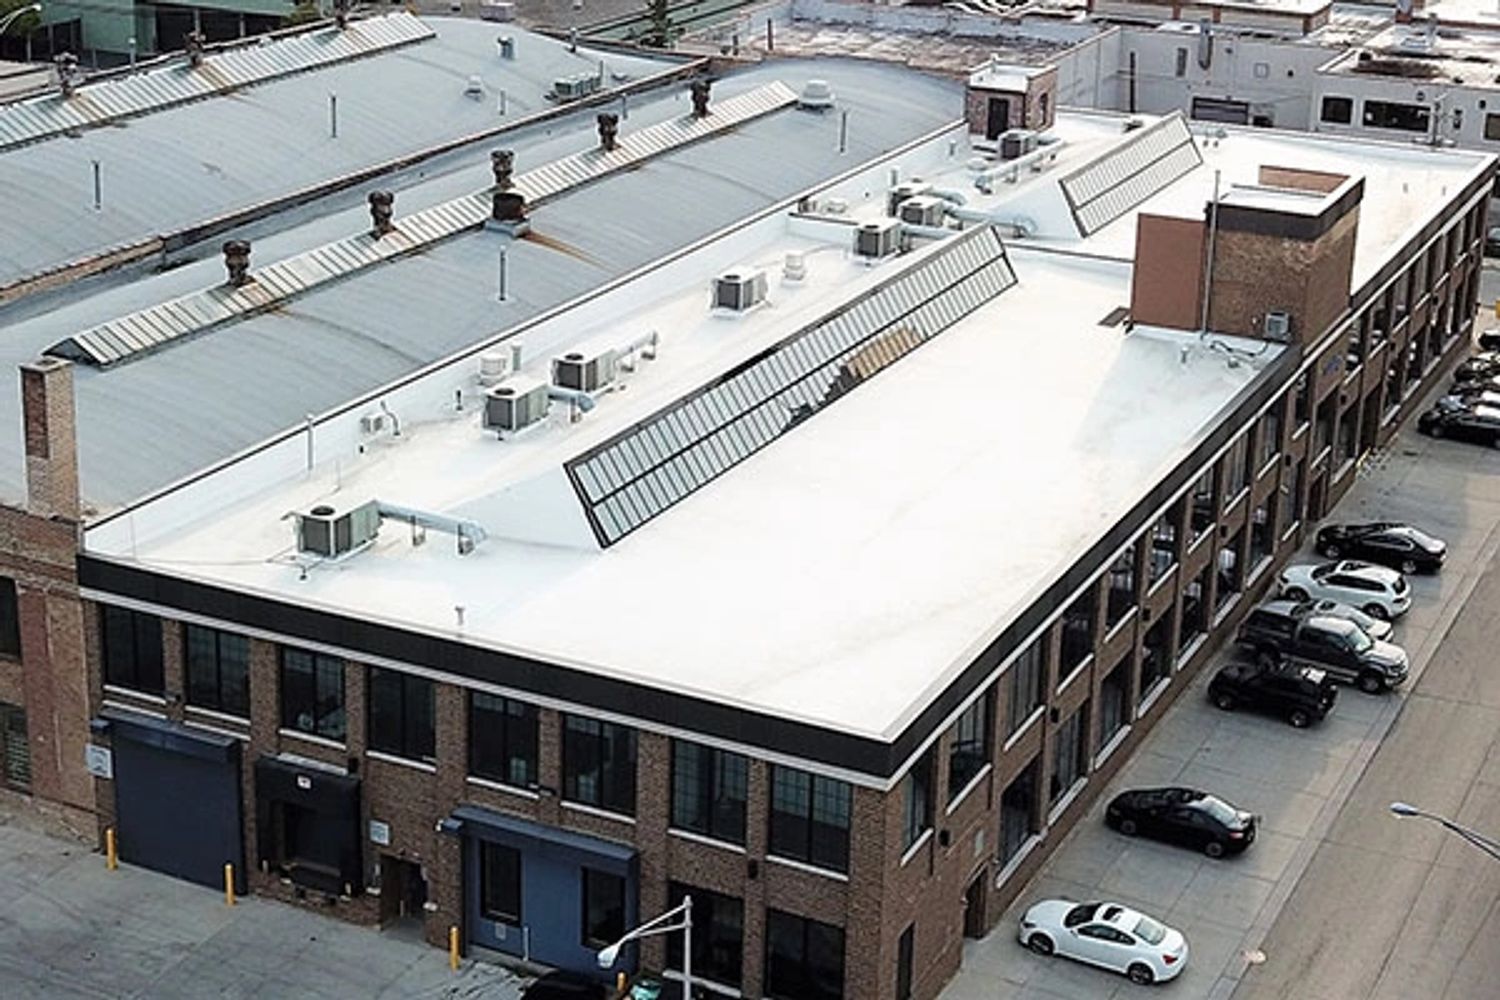 A commercial building rooftop illustrating types of roof repair.